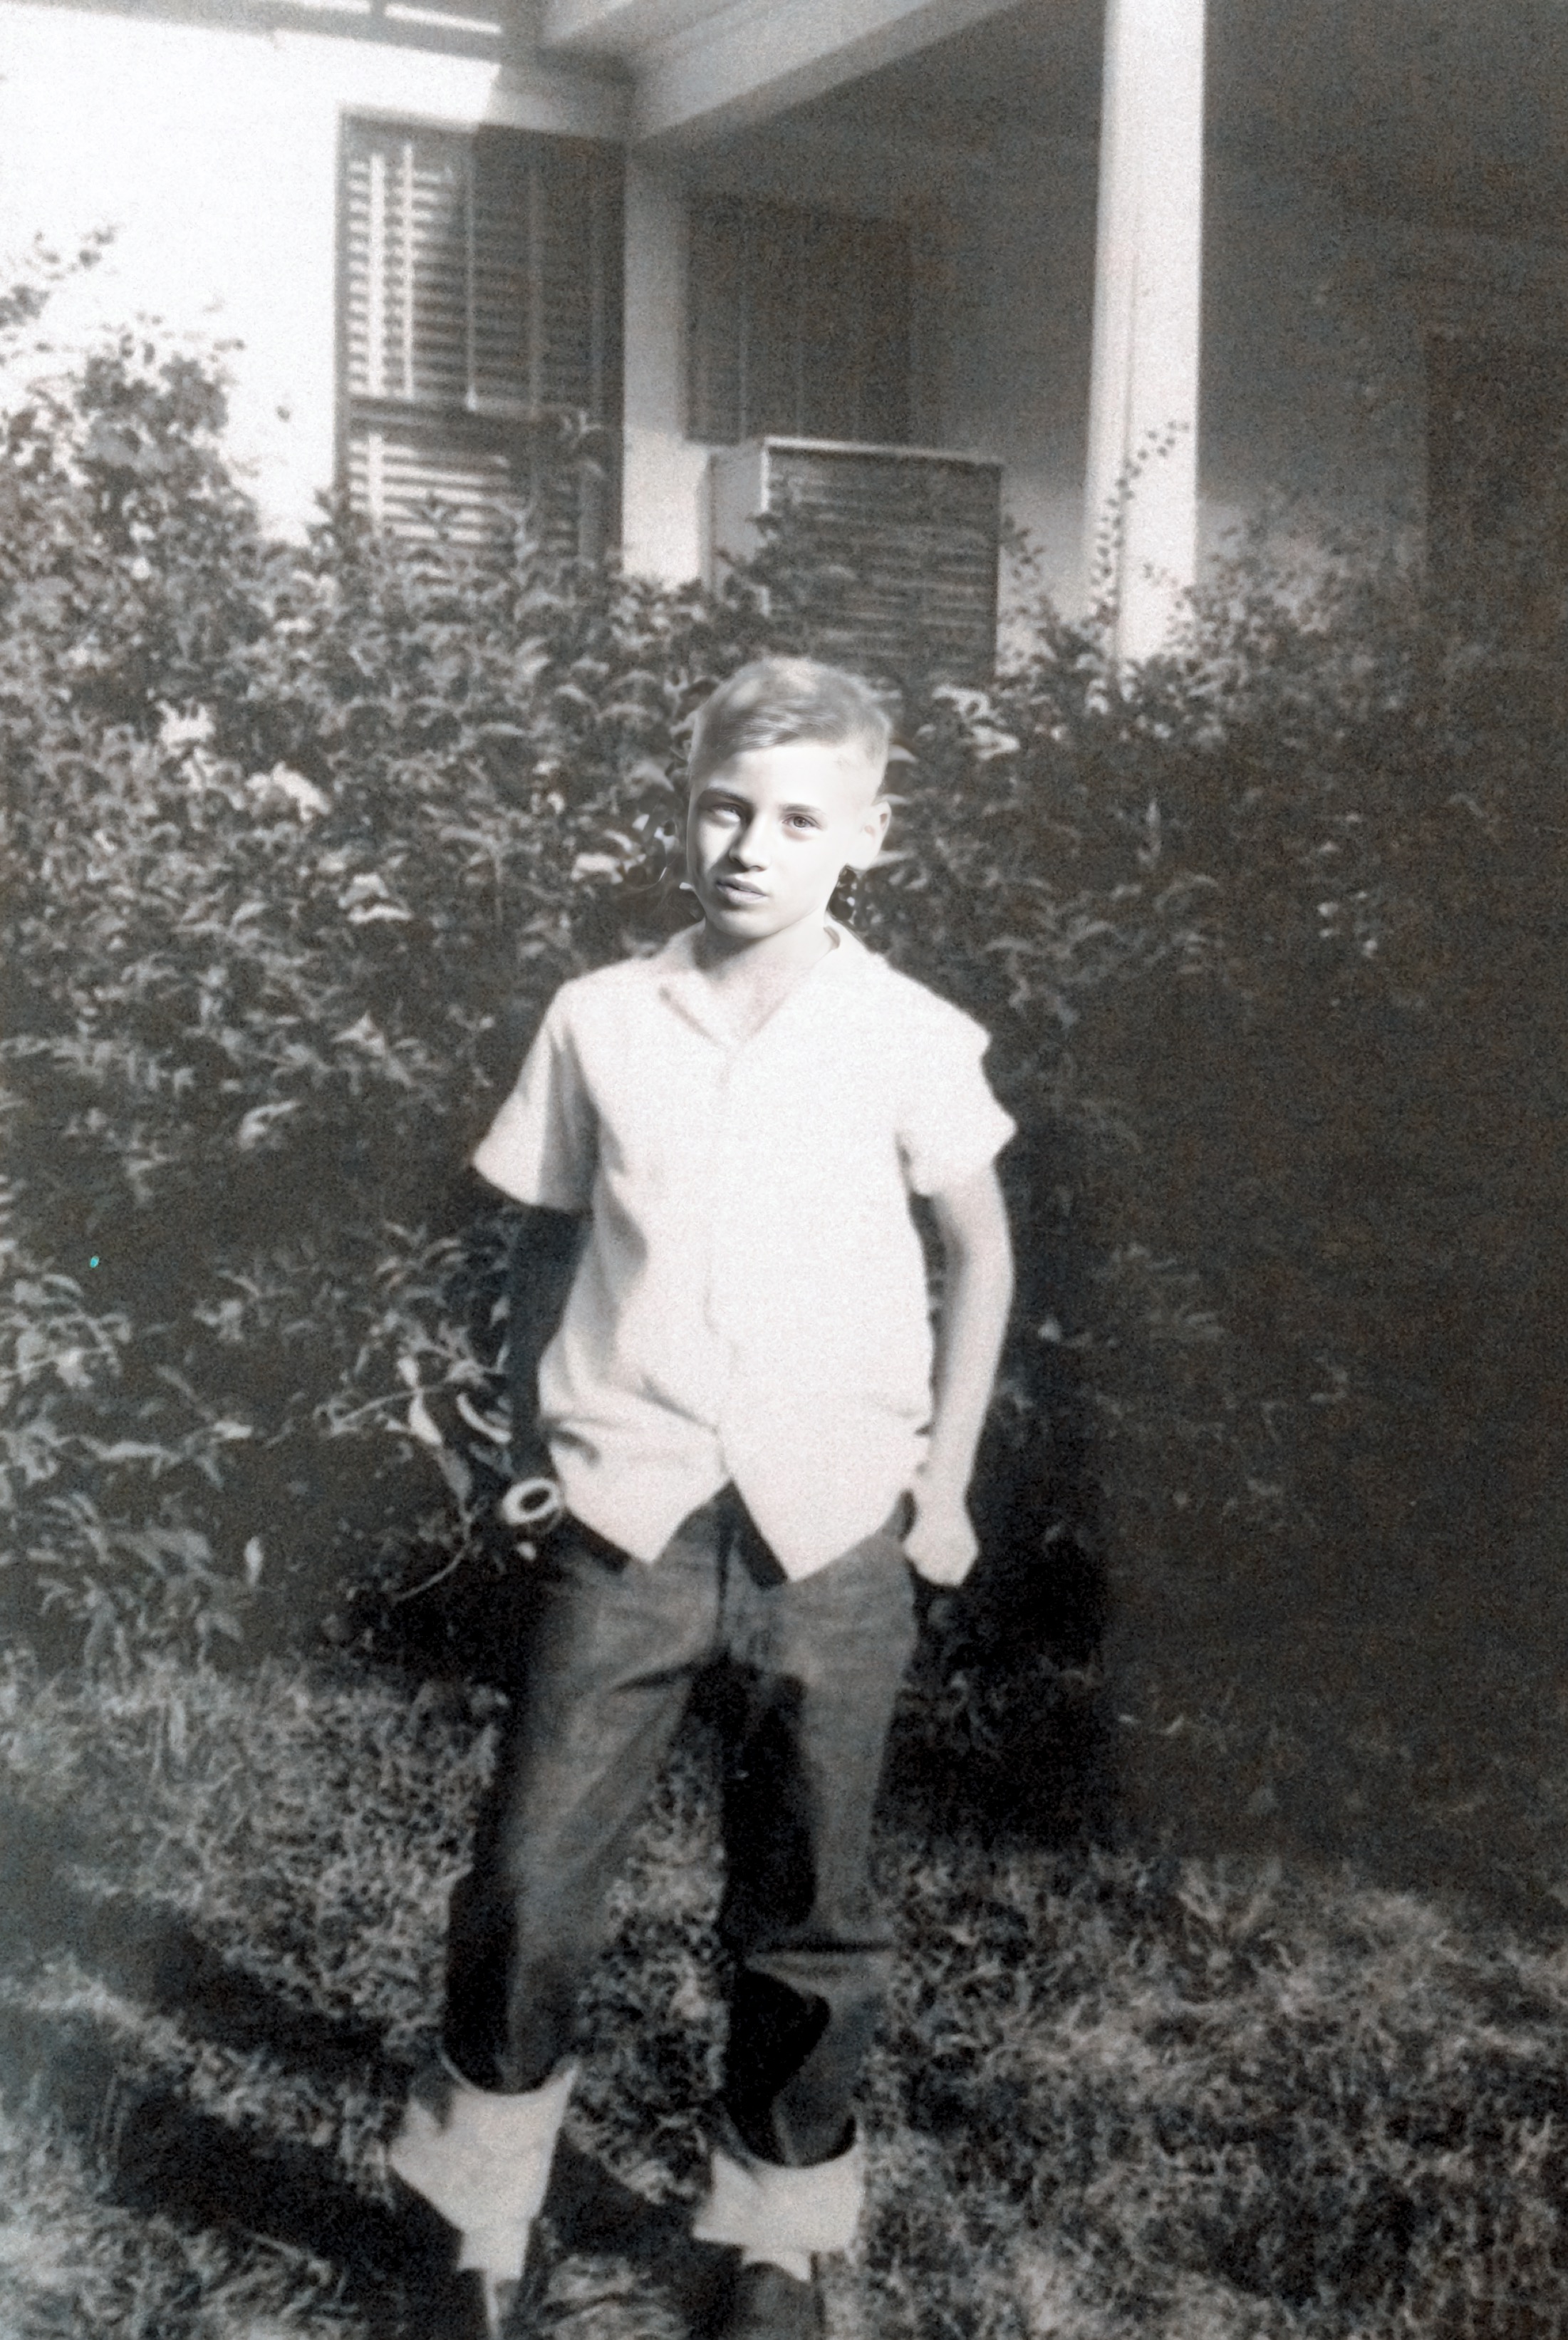 My Dad Thomas J. Boles About 12-13 years old 1957-58